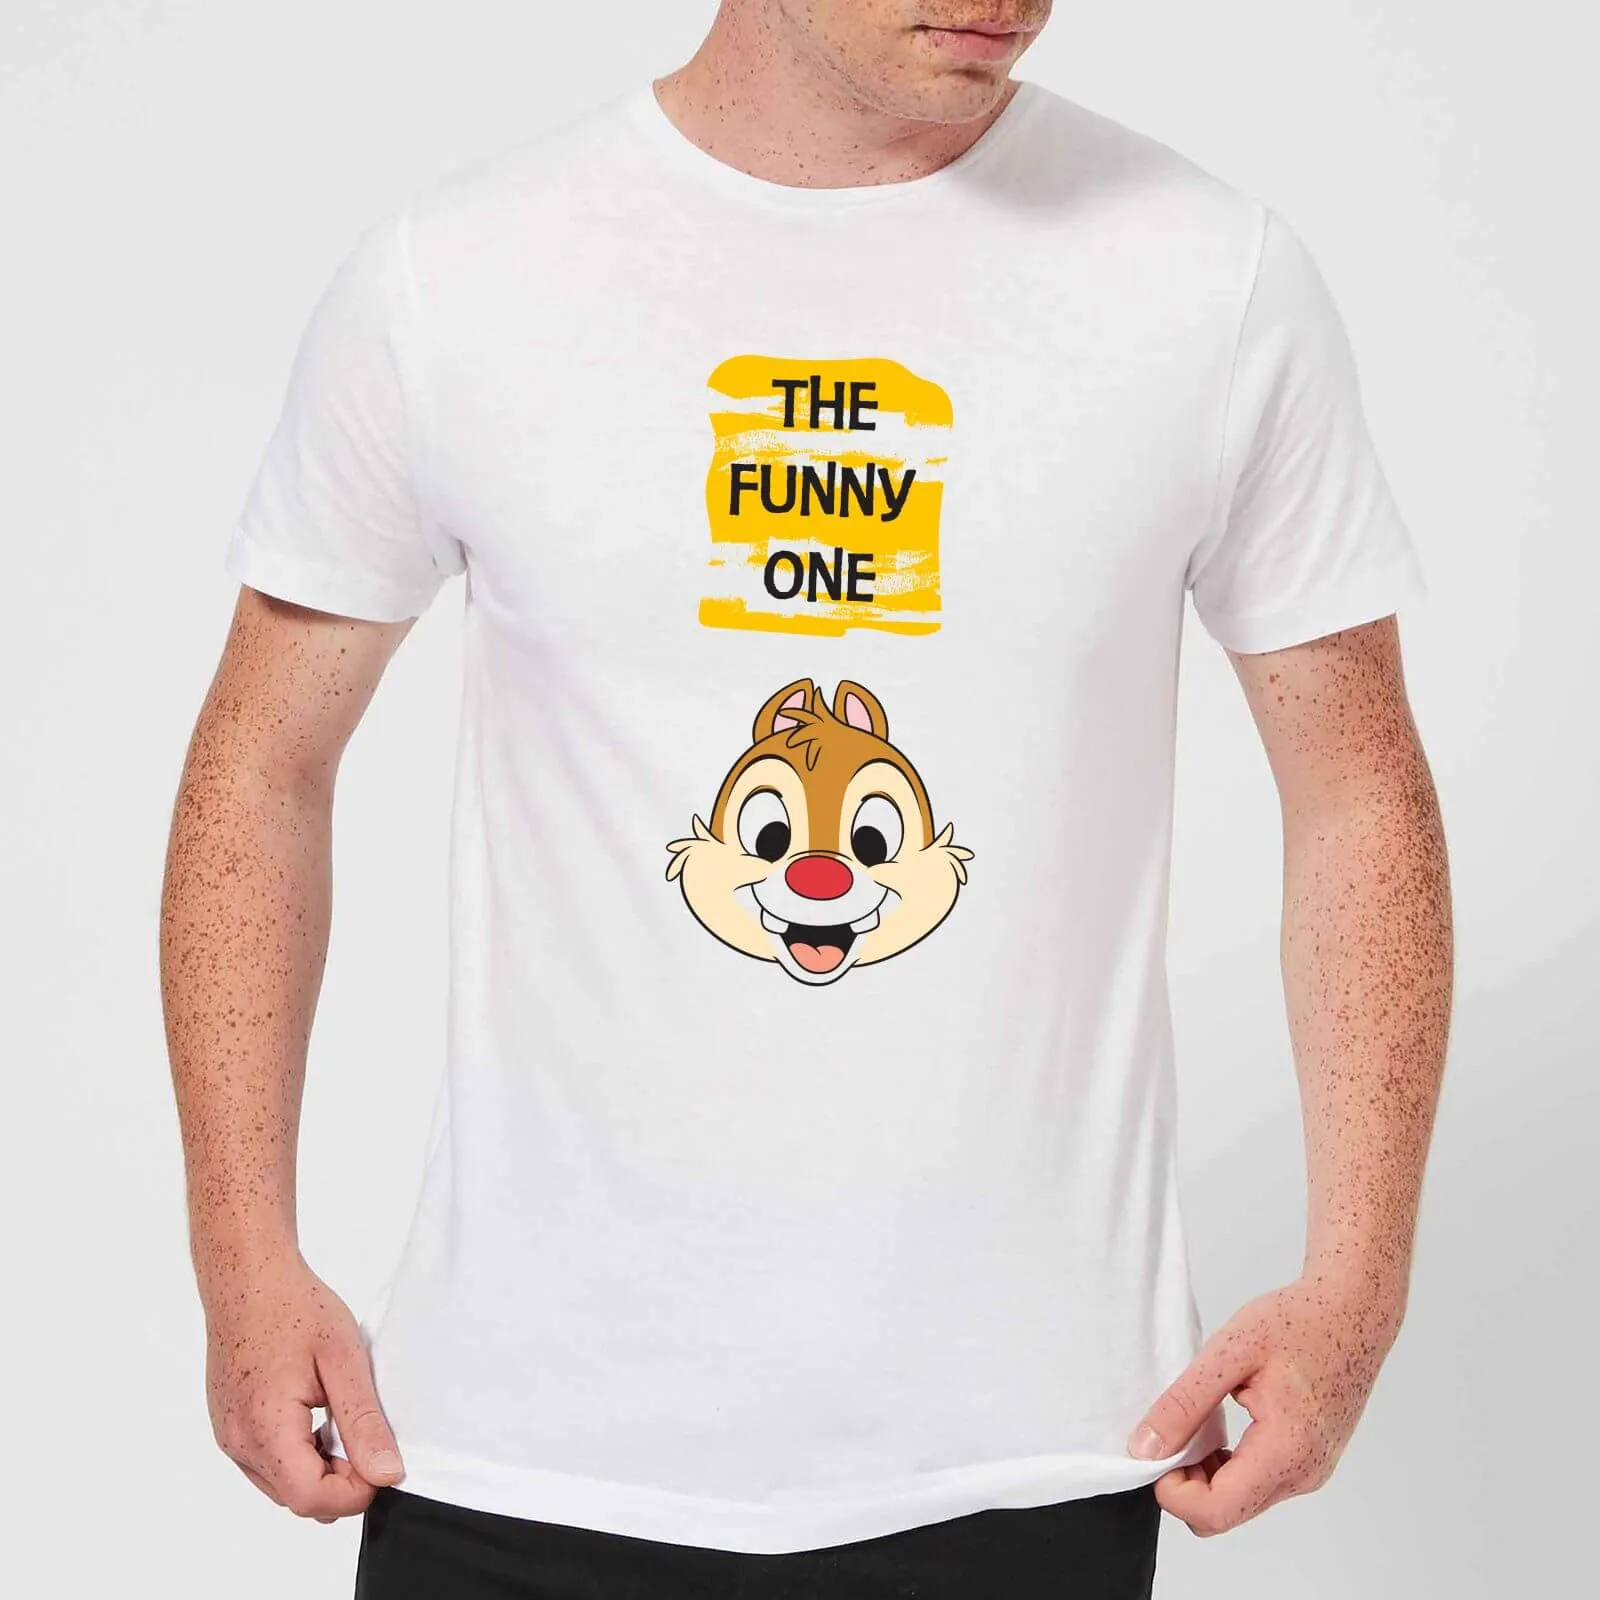  Chip 'N' Dale The Funny One Men's T-Shirt - White - 5XL